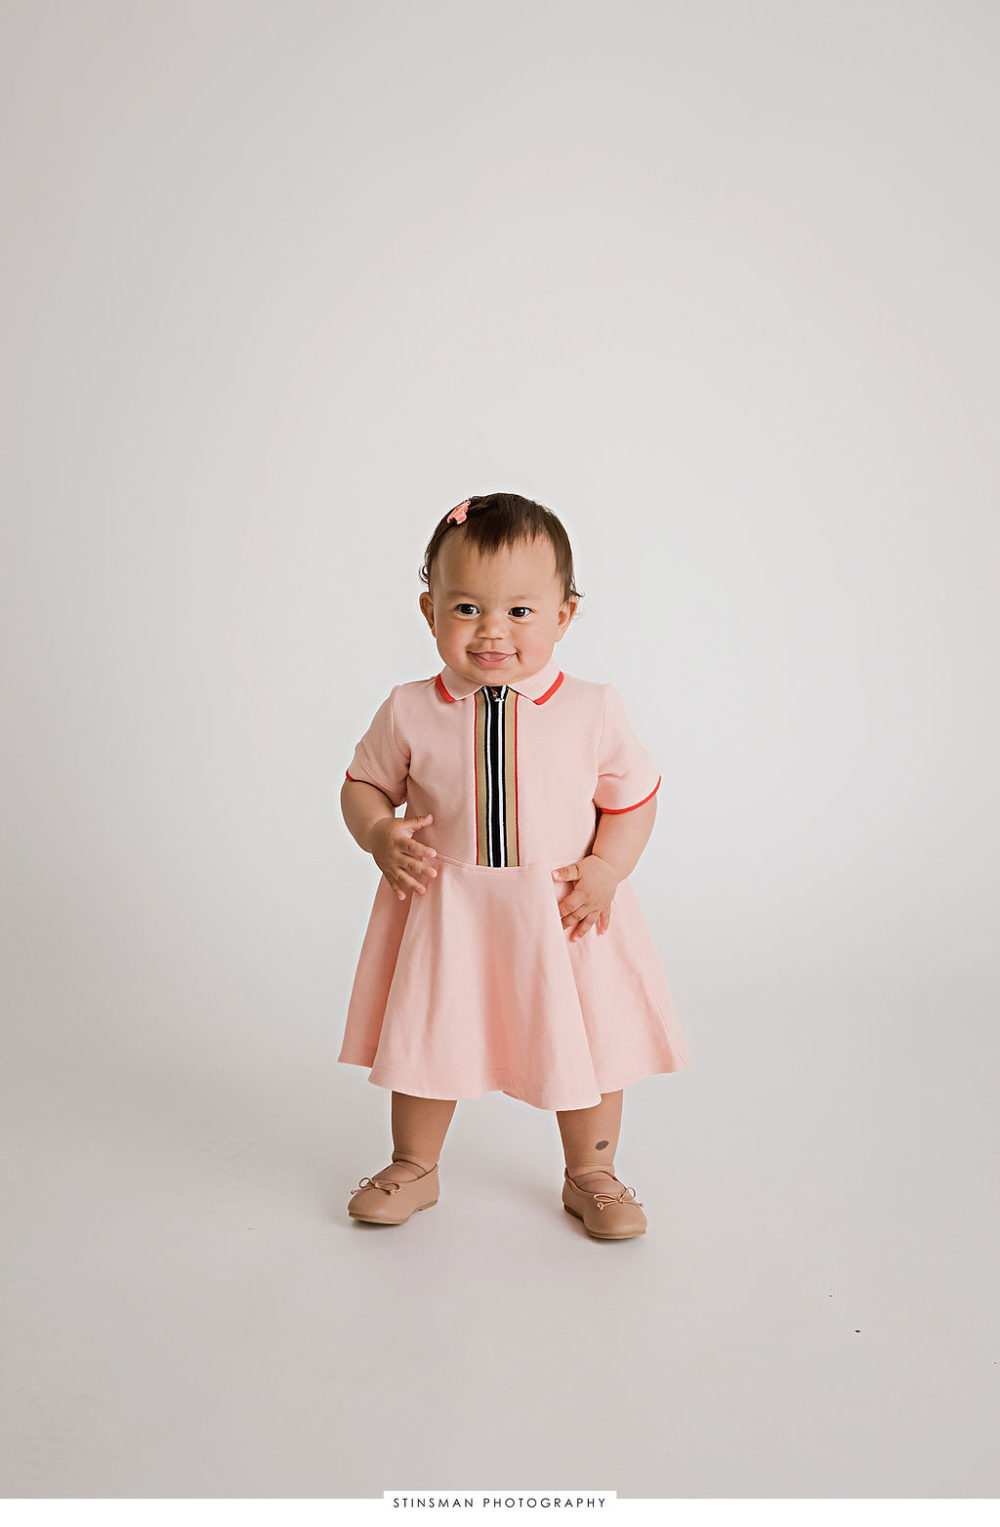 One year old wearing dress for her fashionable first birthday session in Hackensack, New Jersey.